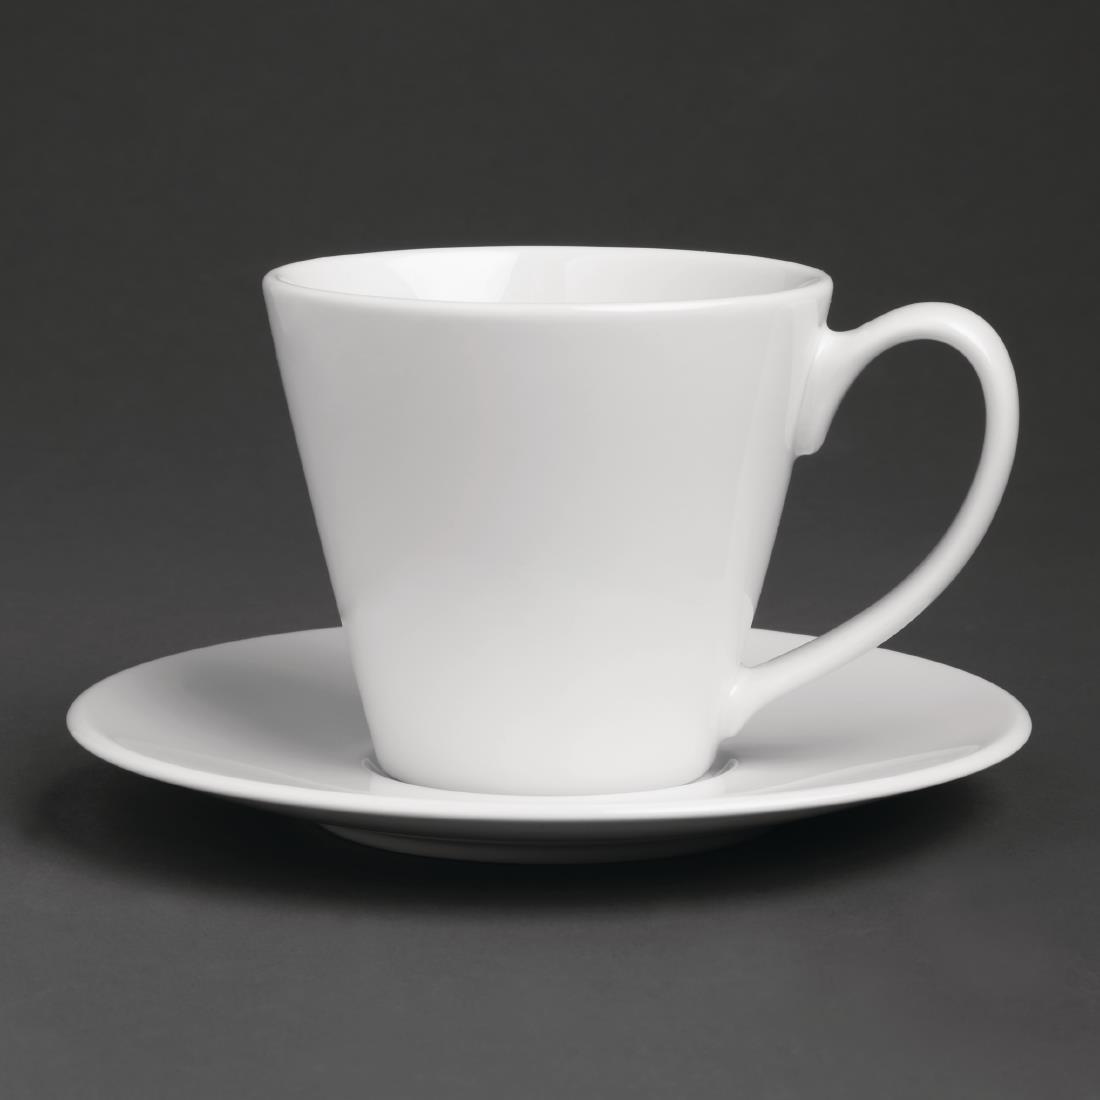 Royal Porcelain Classic White Tea Cup 210ml (Pack of 12) - GT927  - 4